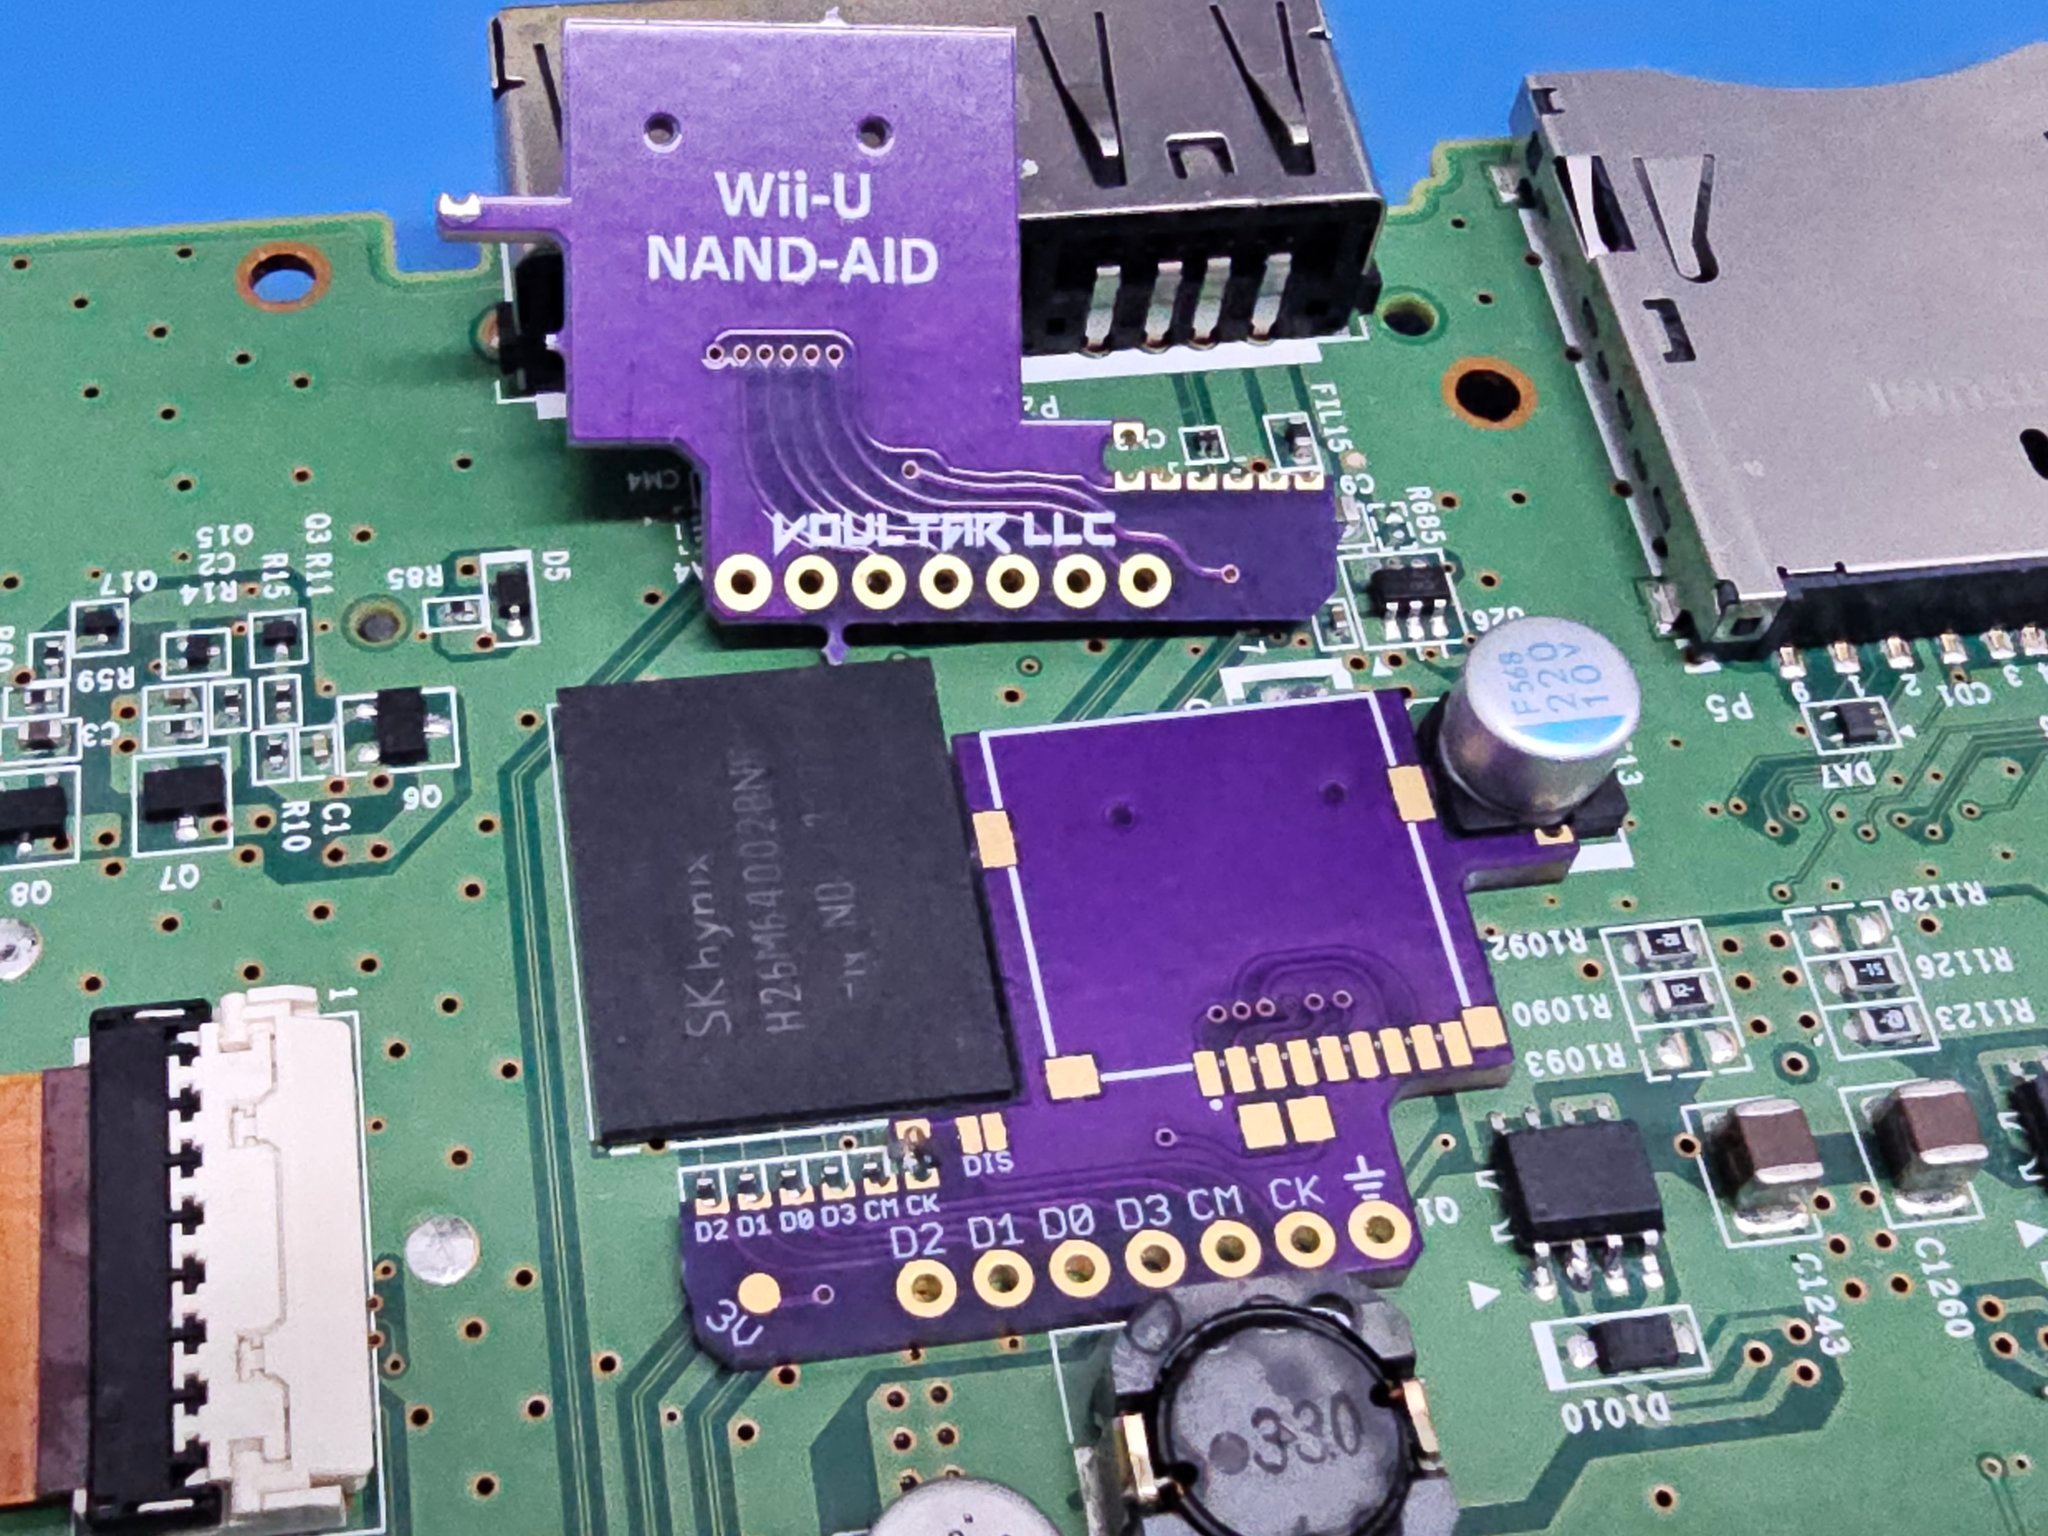 Wii-U NAND-AID - eMMC Recovery and Replacement Interposer Public Test |  Page 5 | GBAtemp.net - The Independent Video Game Community